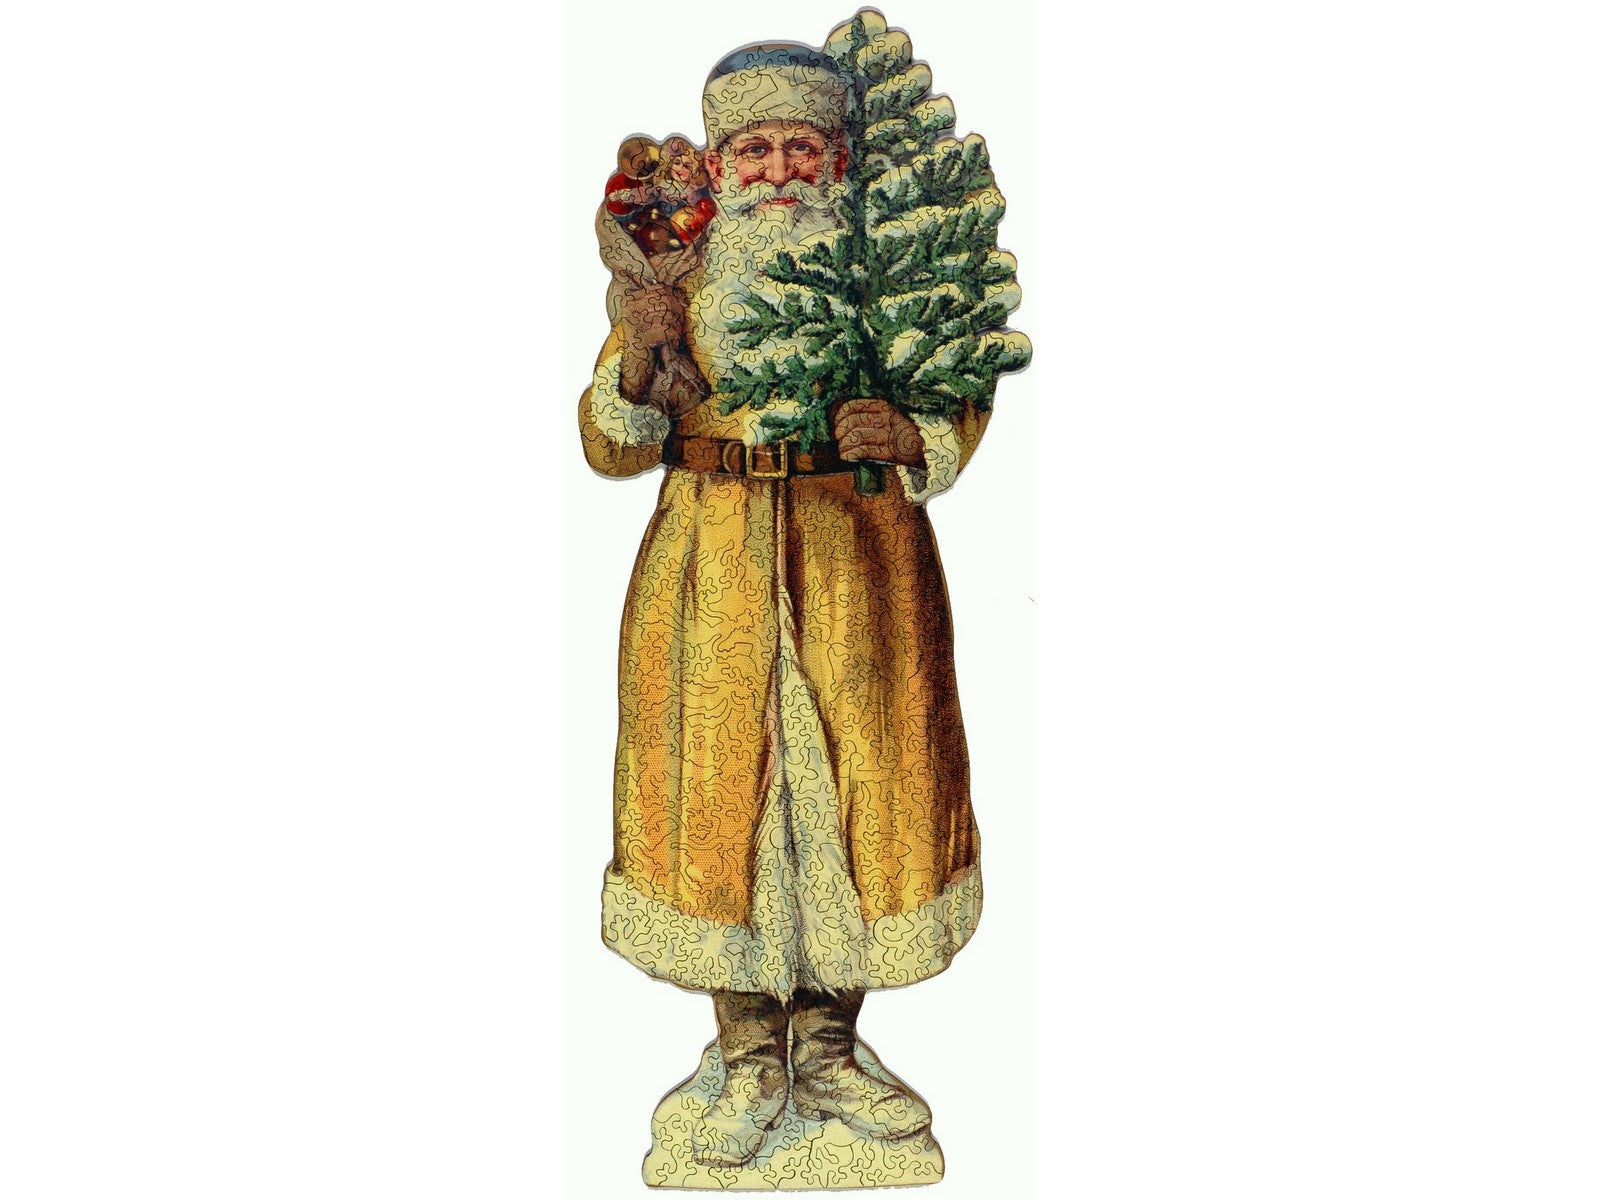 The front of the puzzle, Joyful Yellow Santa, which shows Santa Claus wearing a yellow coat, holding a bag of toys and a small Christmas Tree.